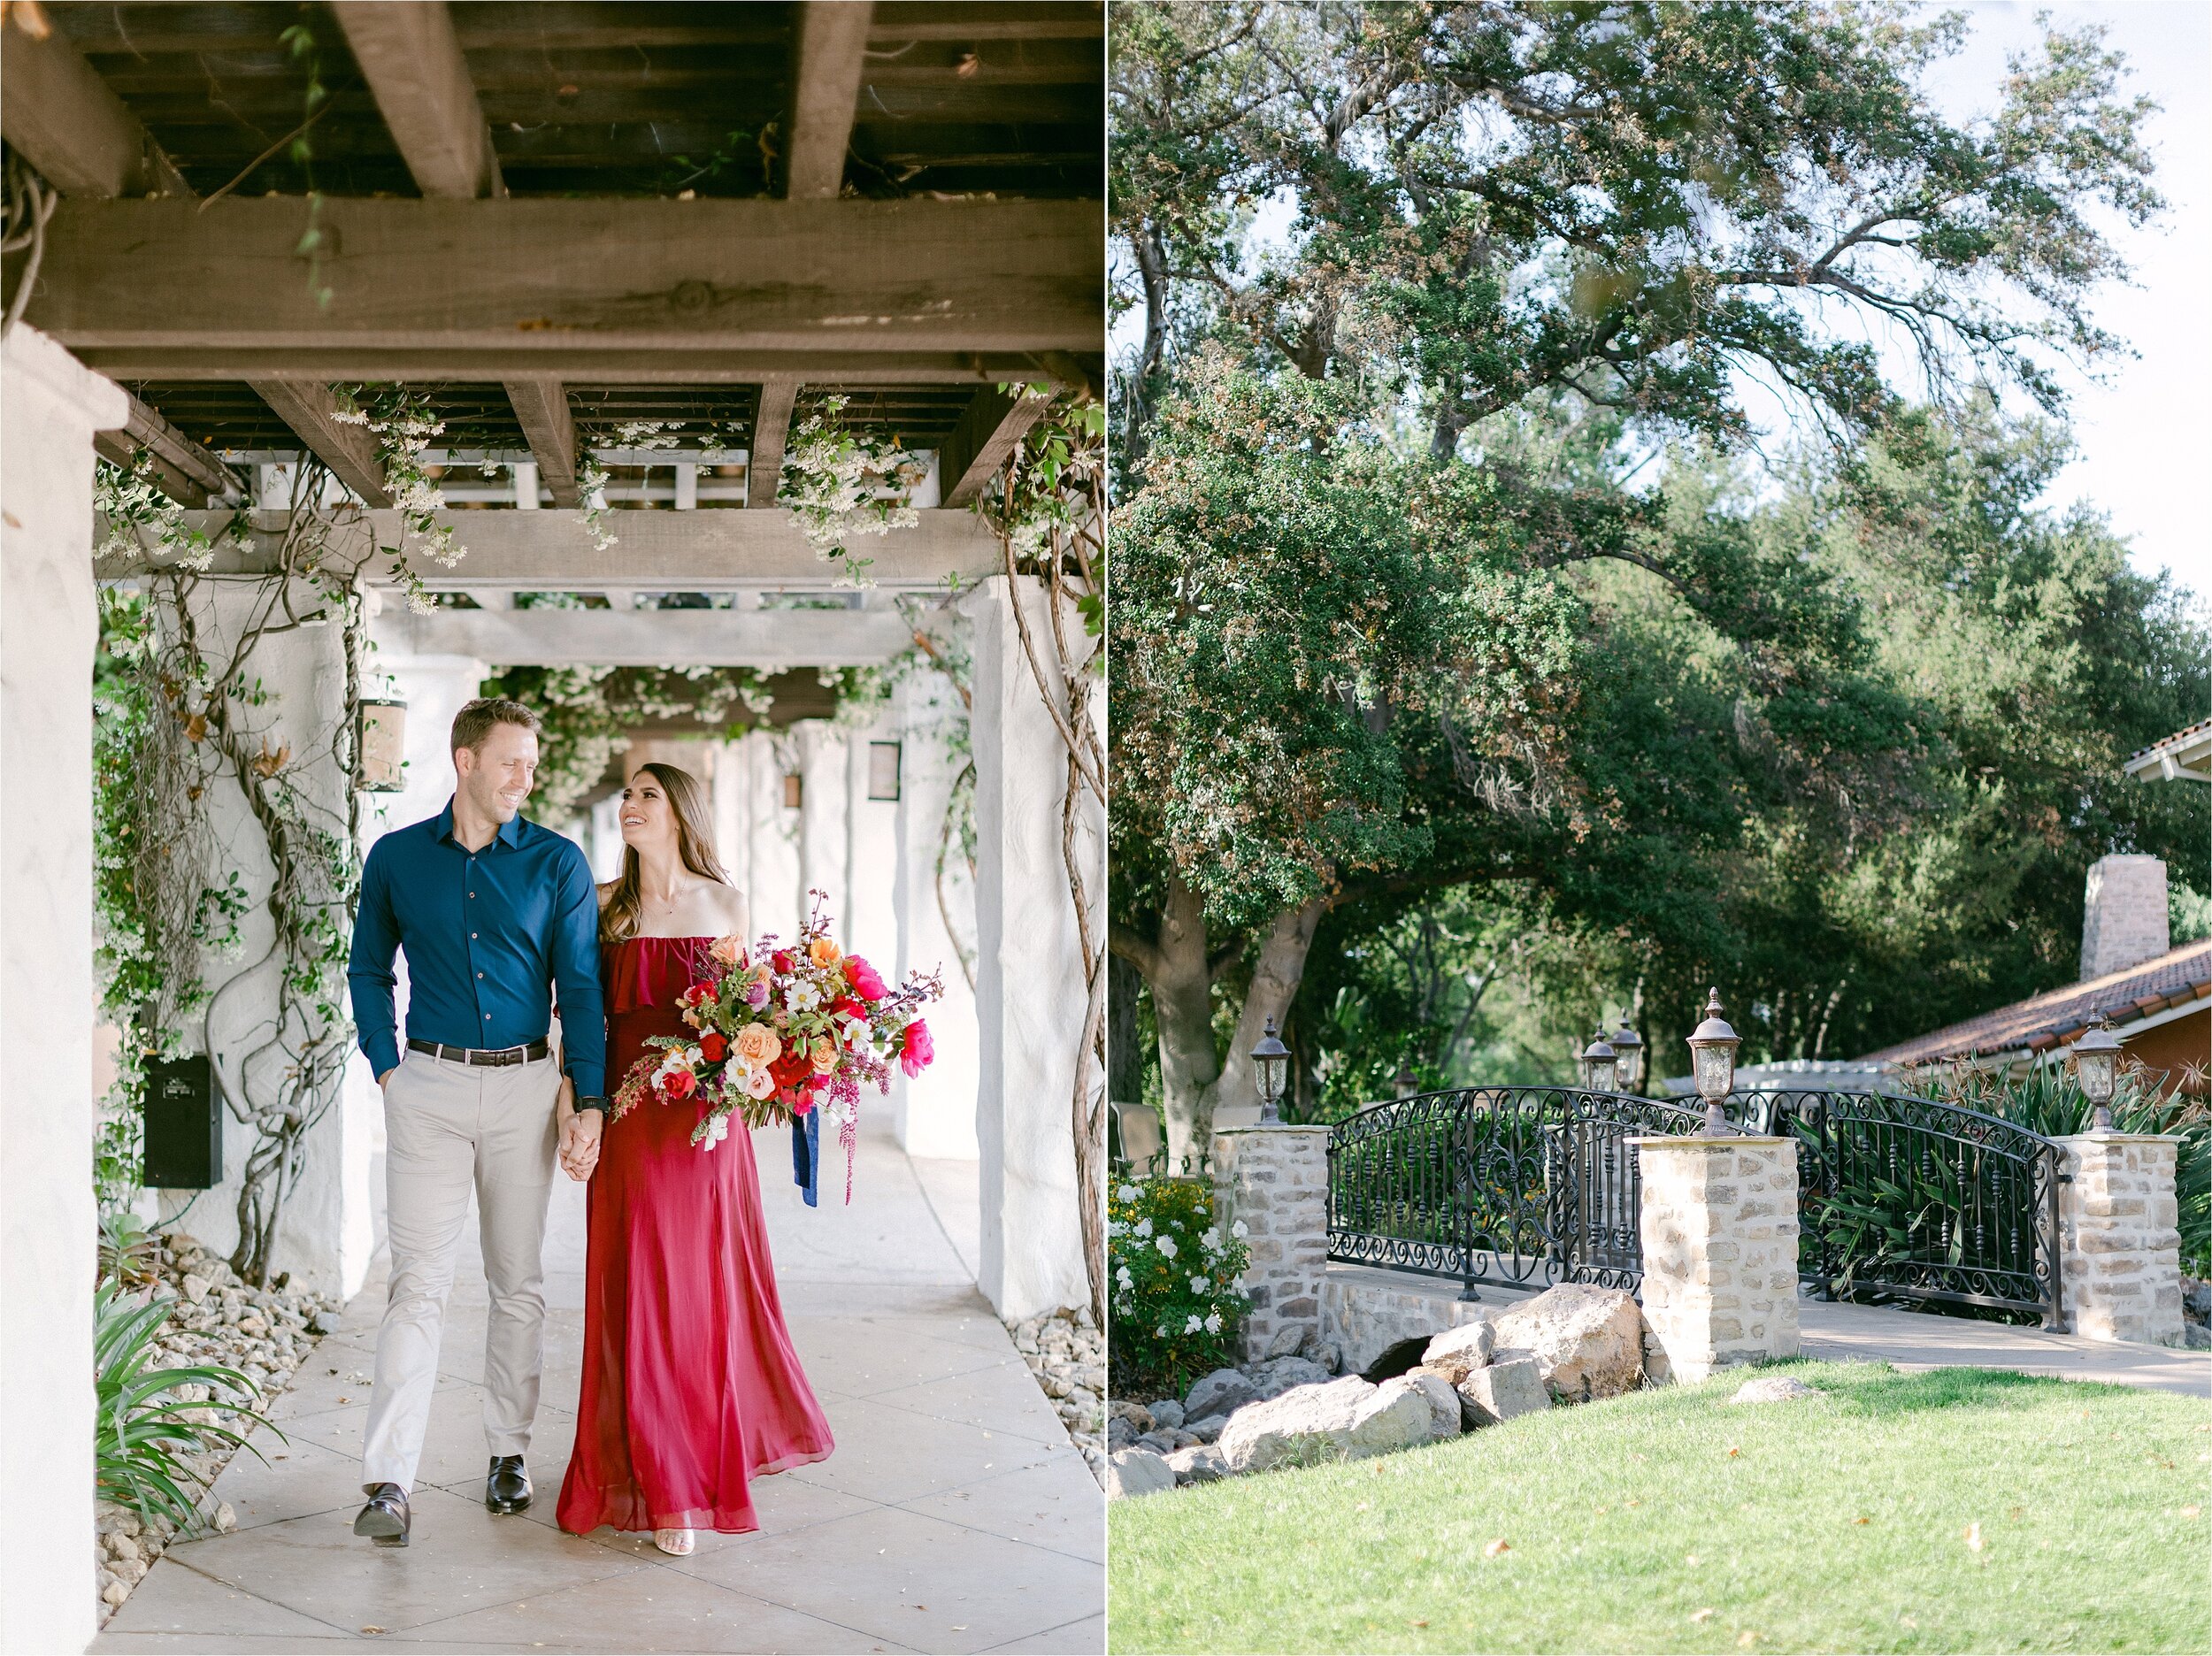 Male in midnight blue button down and female in long, off shoulder wine colored dress hold hands and walk through the trellis